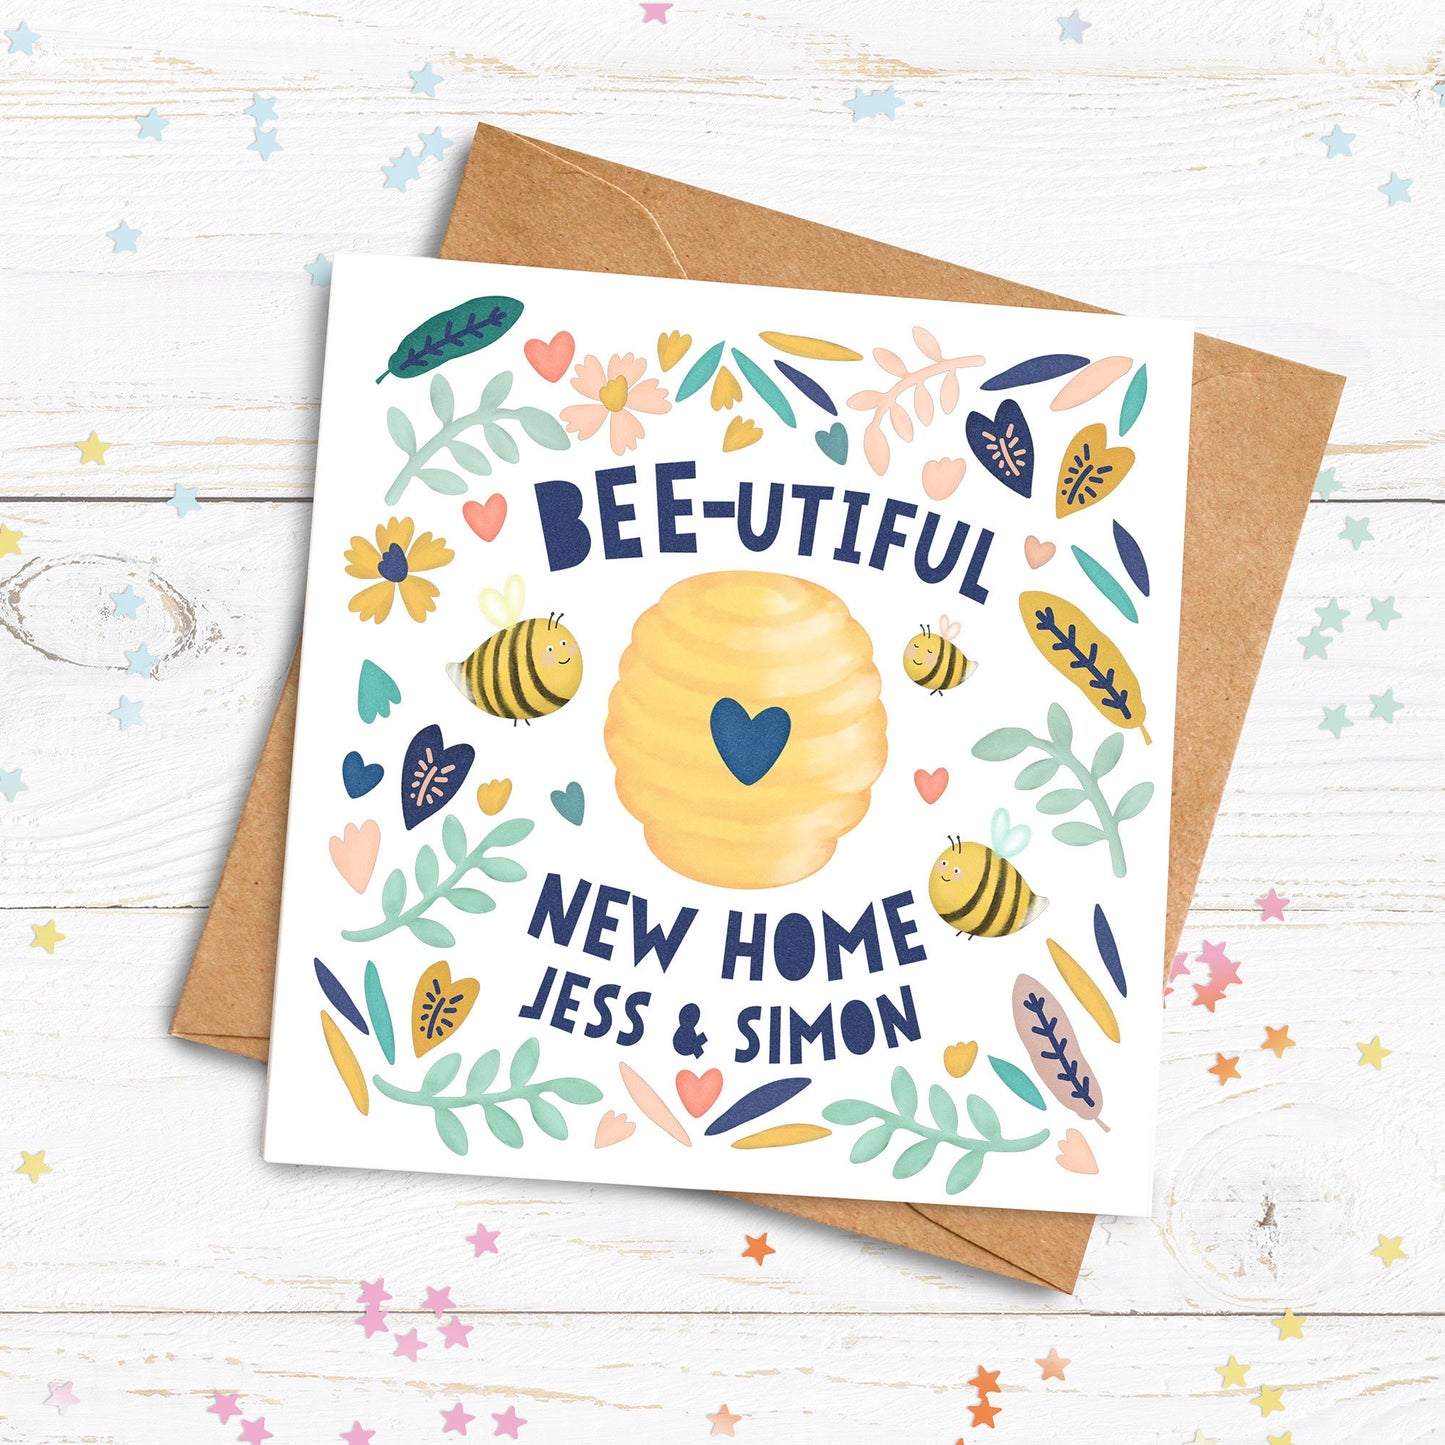 BEEutiful New home Card. Bee Card. New Home Card. Moving House Card. Cute Bee Cards. Send Direct Option.